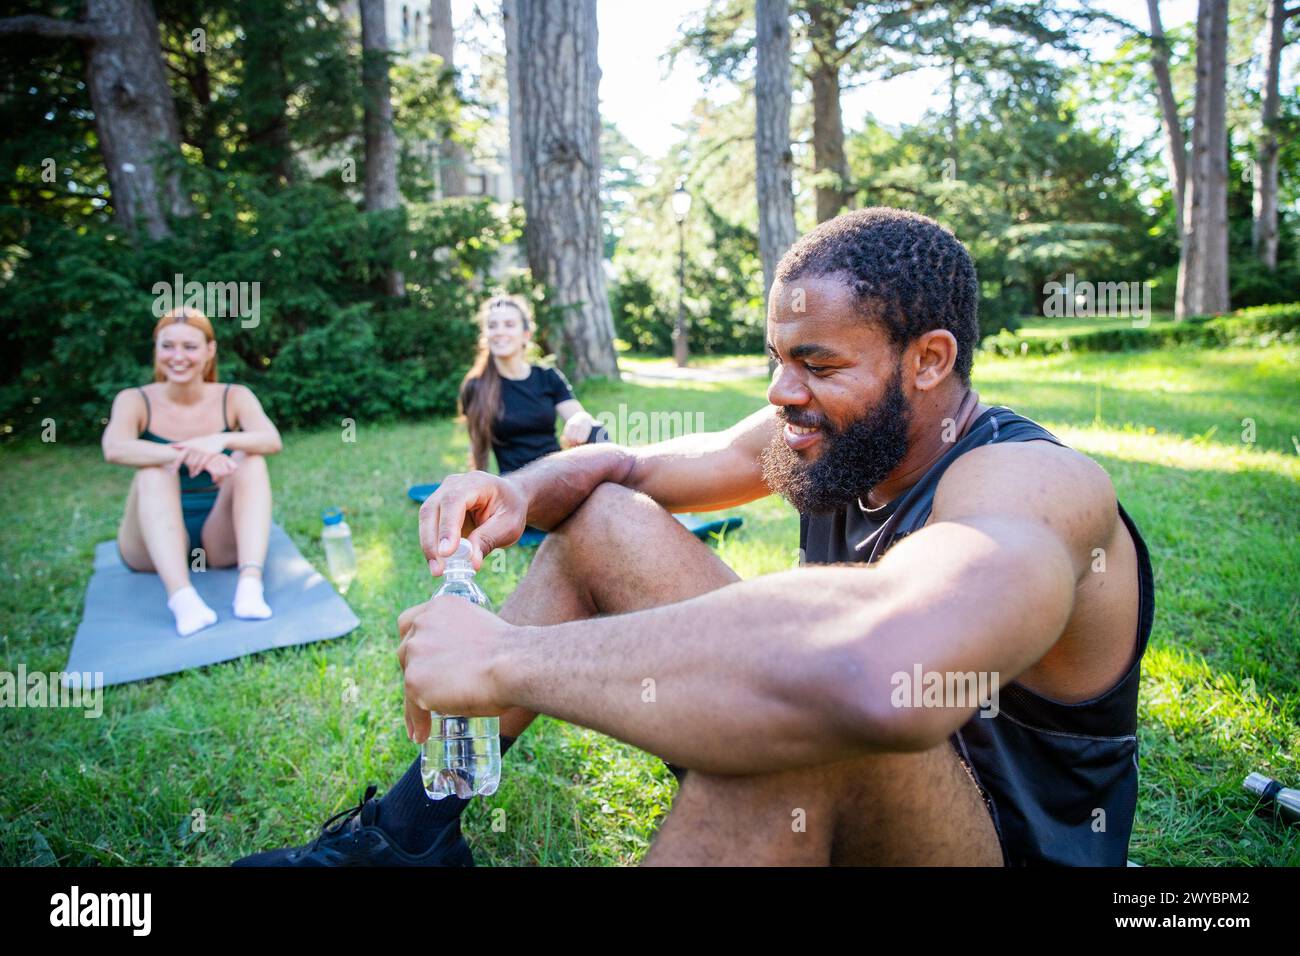 A man with a beard is sitting on a mat in a park is drinking water with two other people. Stock Photo